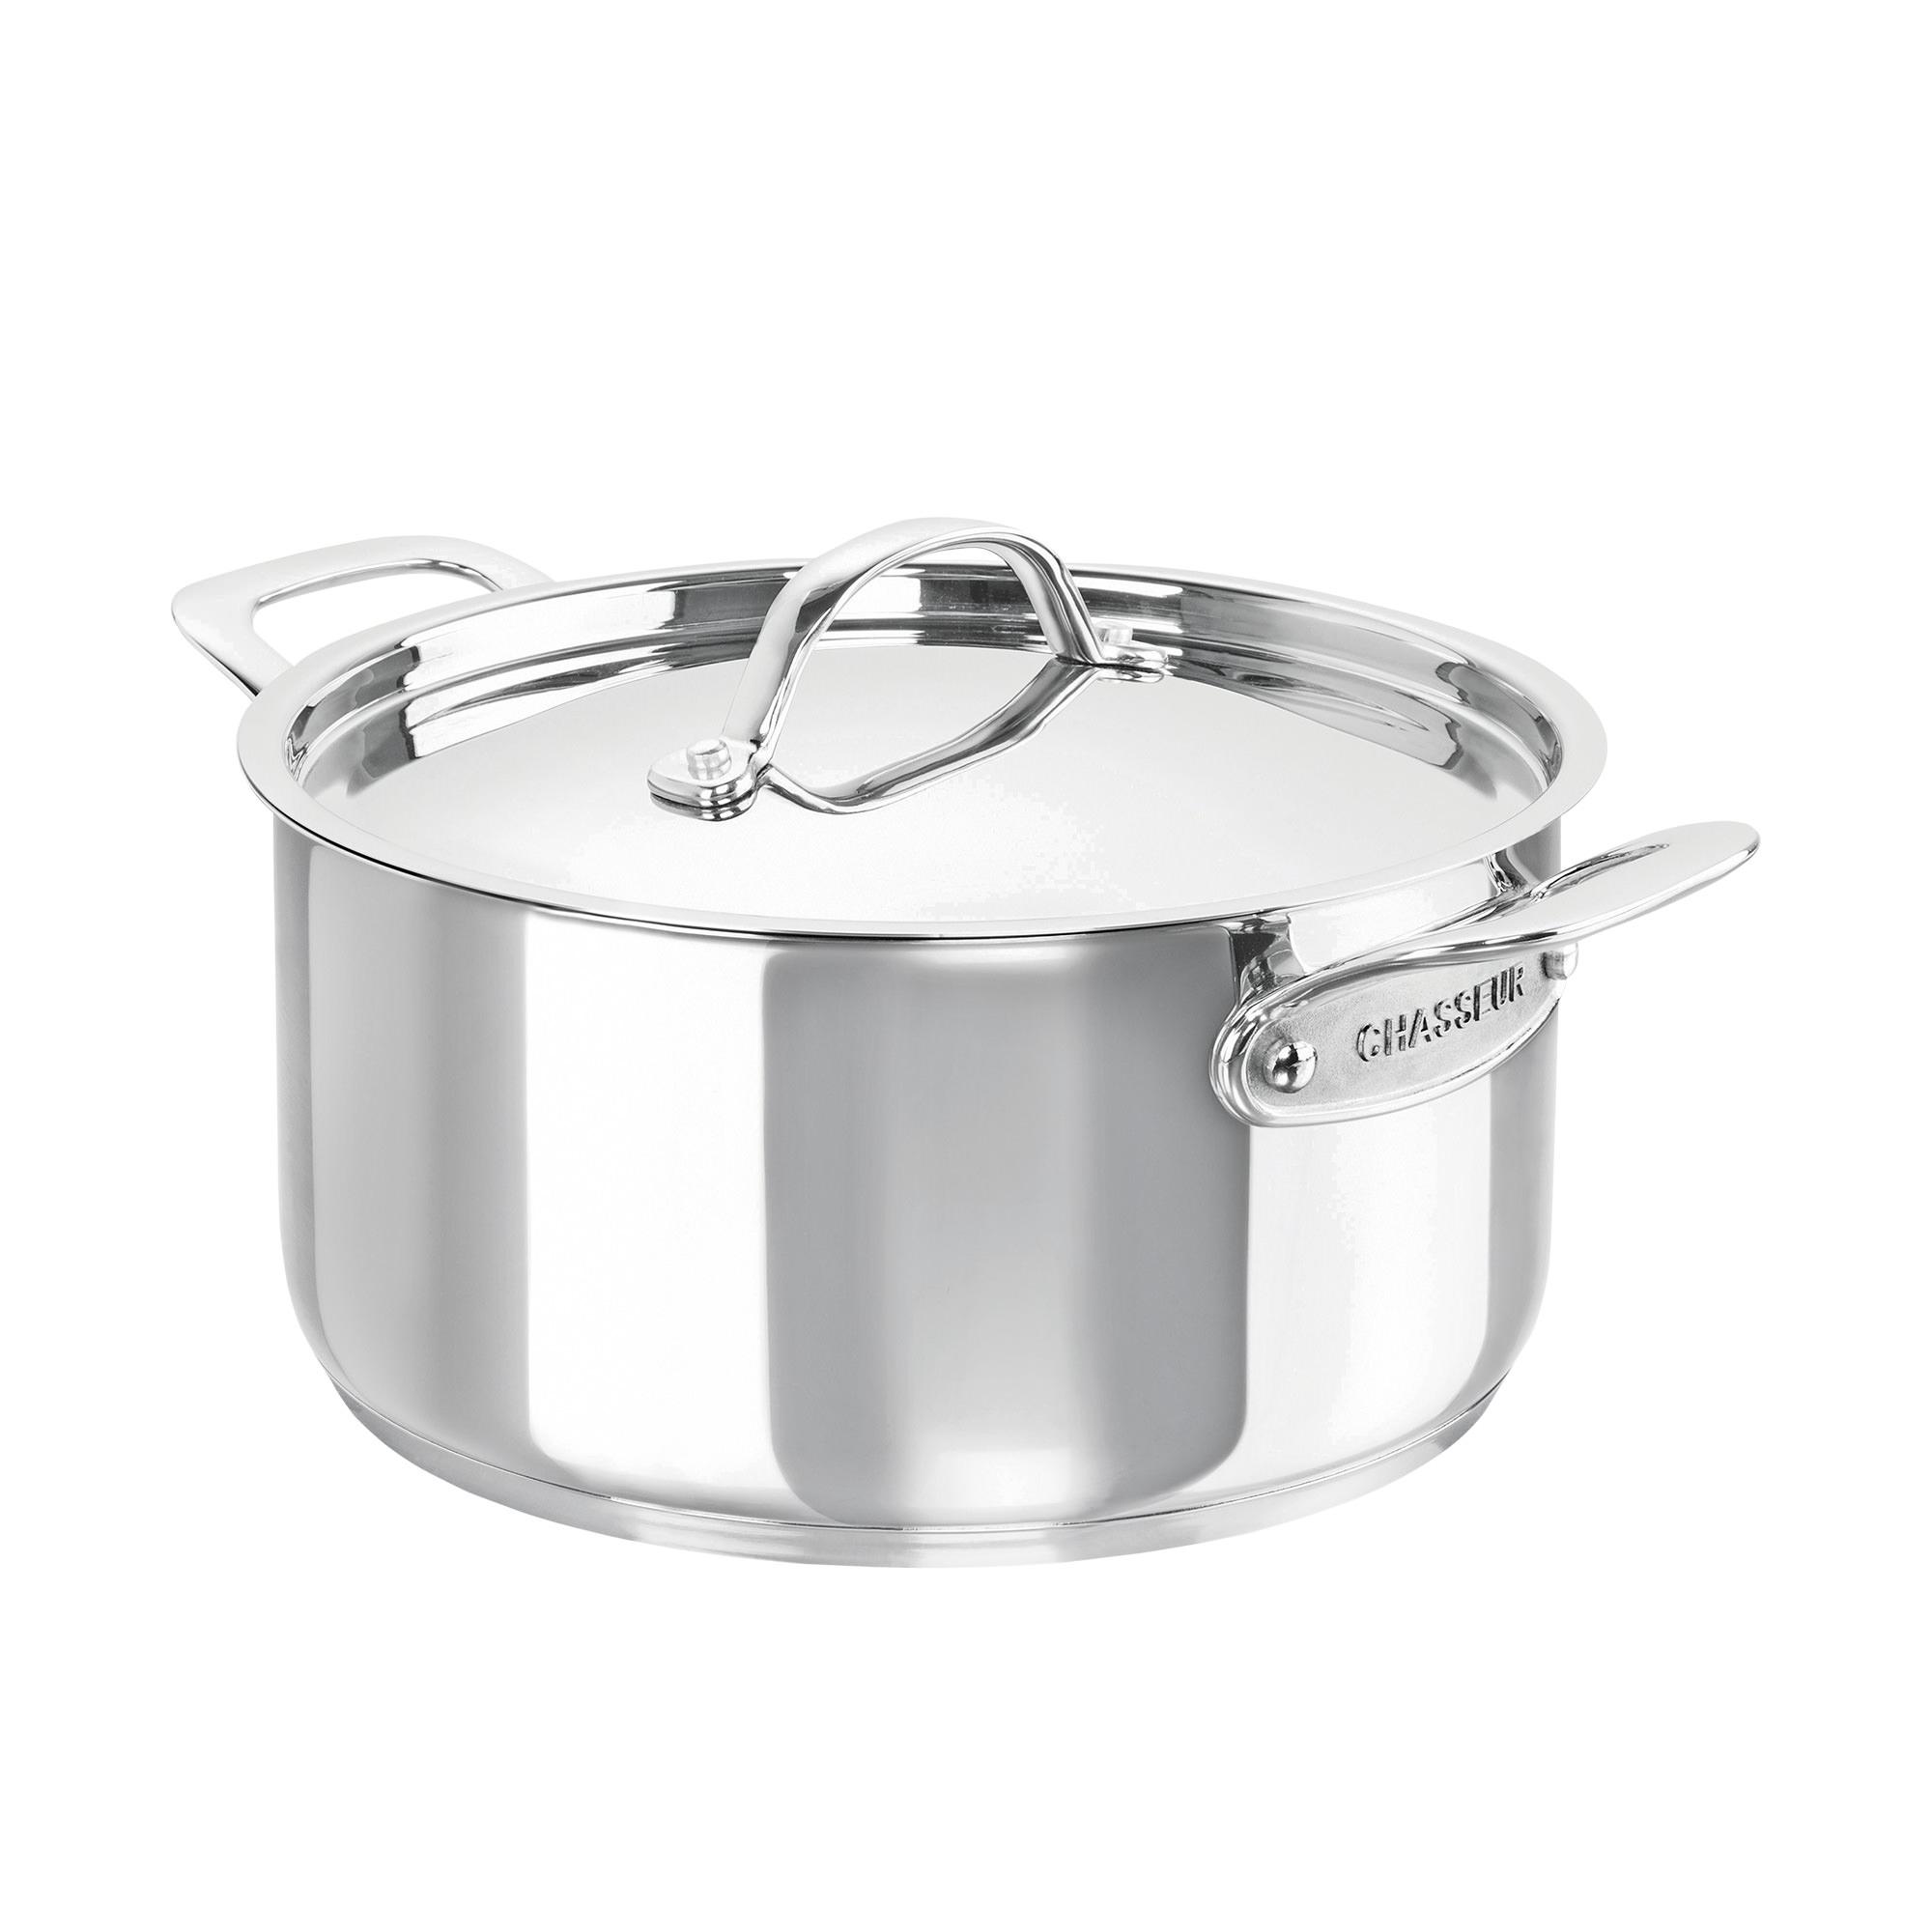 Chasseur Maison 5pc Stainless Steel Cookware Set Image 3